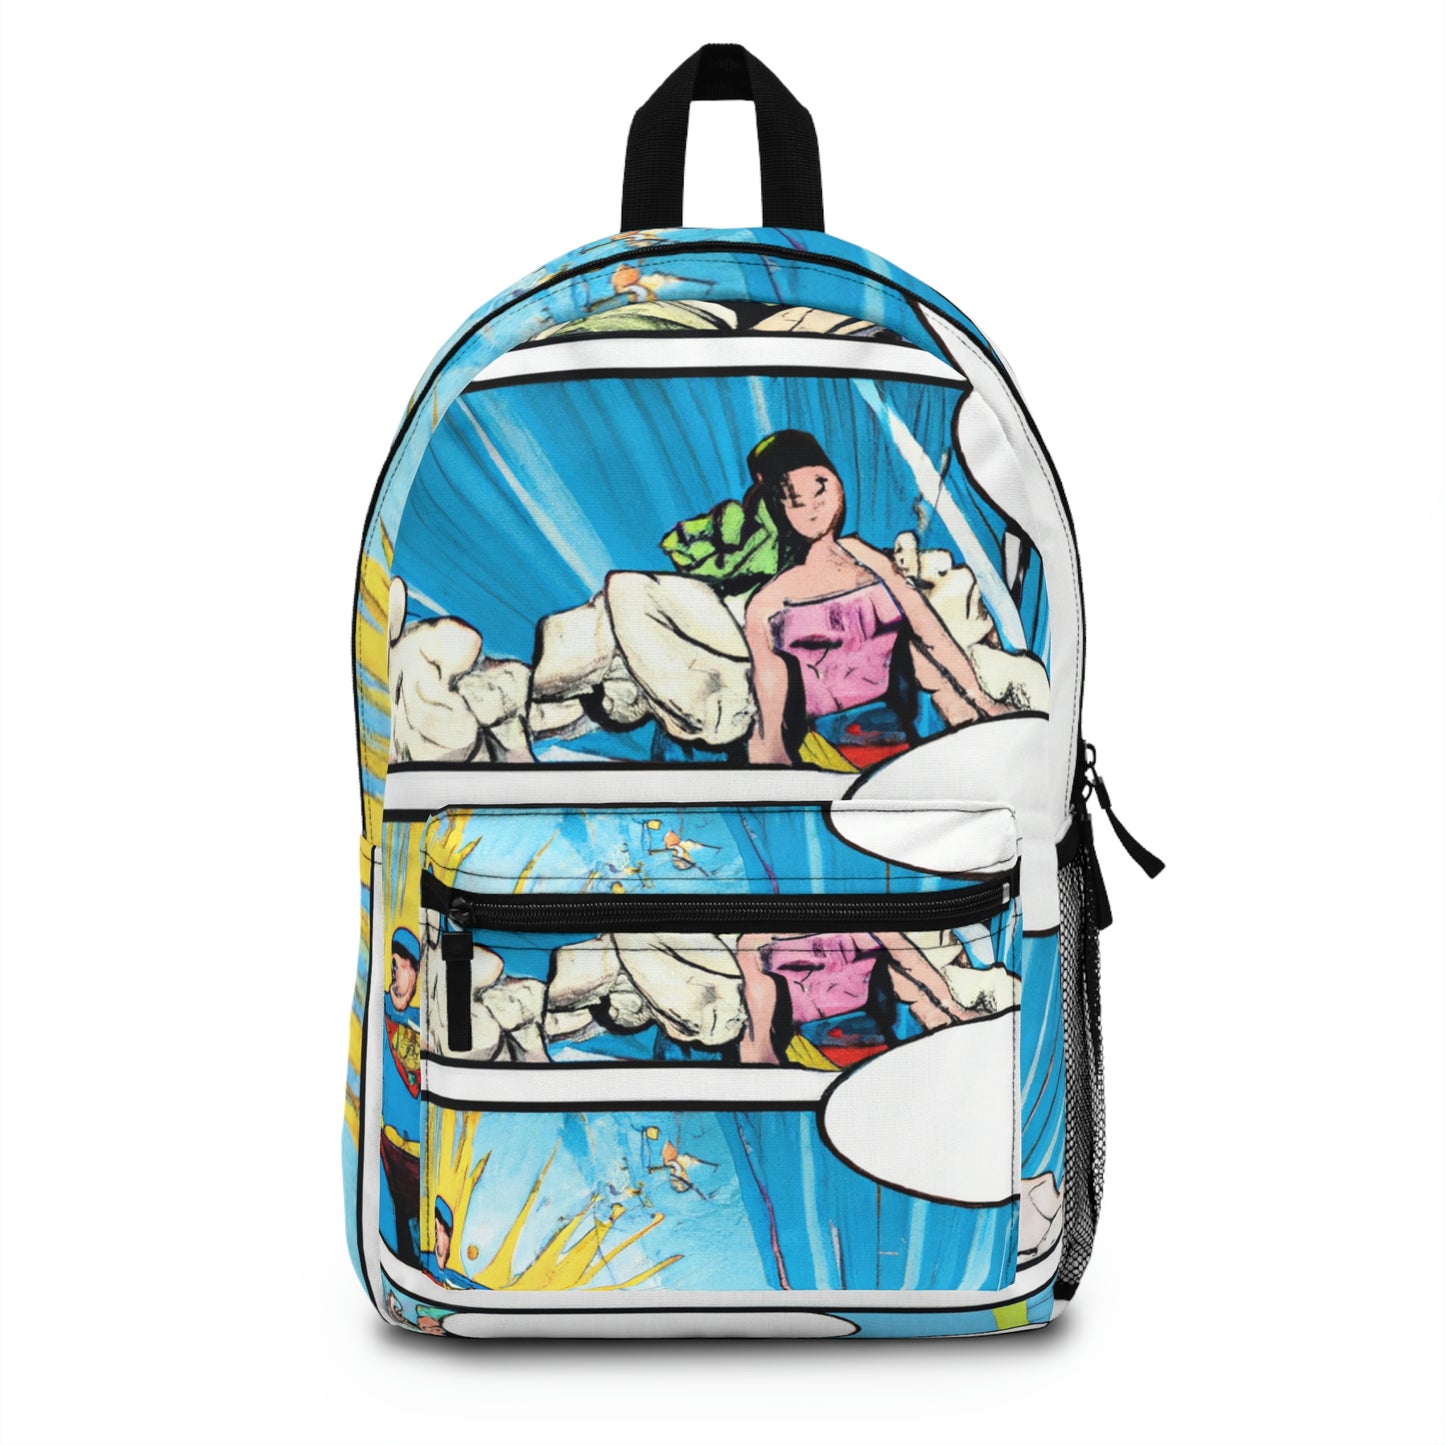 Sparky the Invincible - Comic Book Backpack